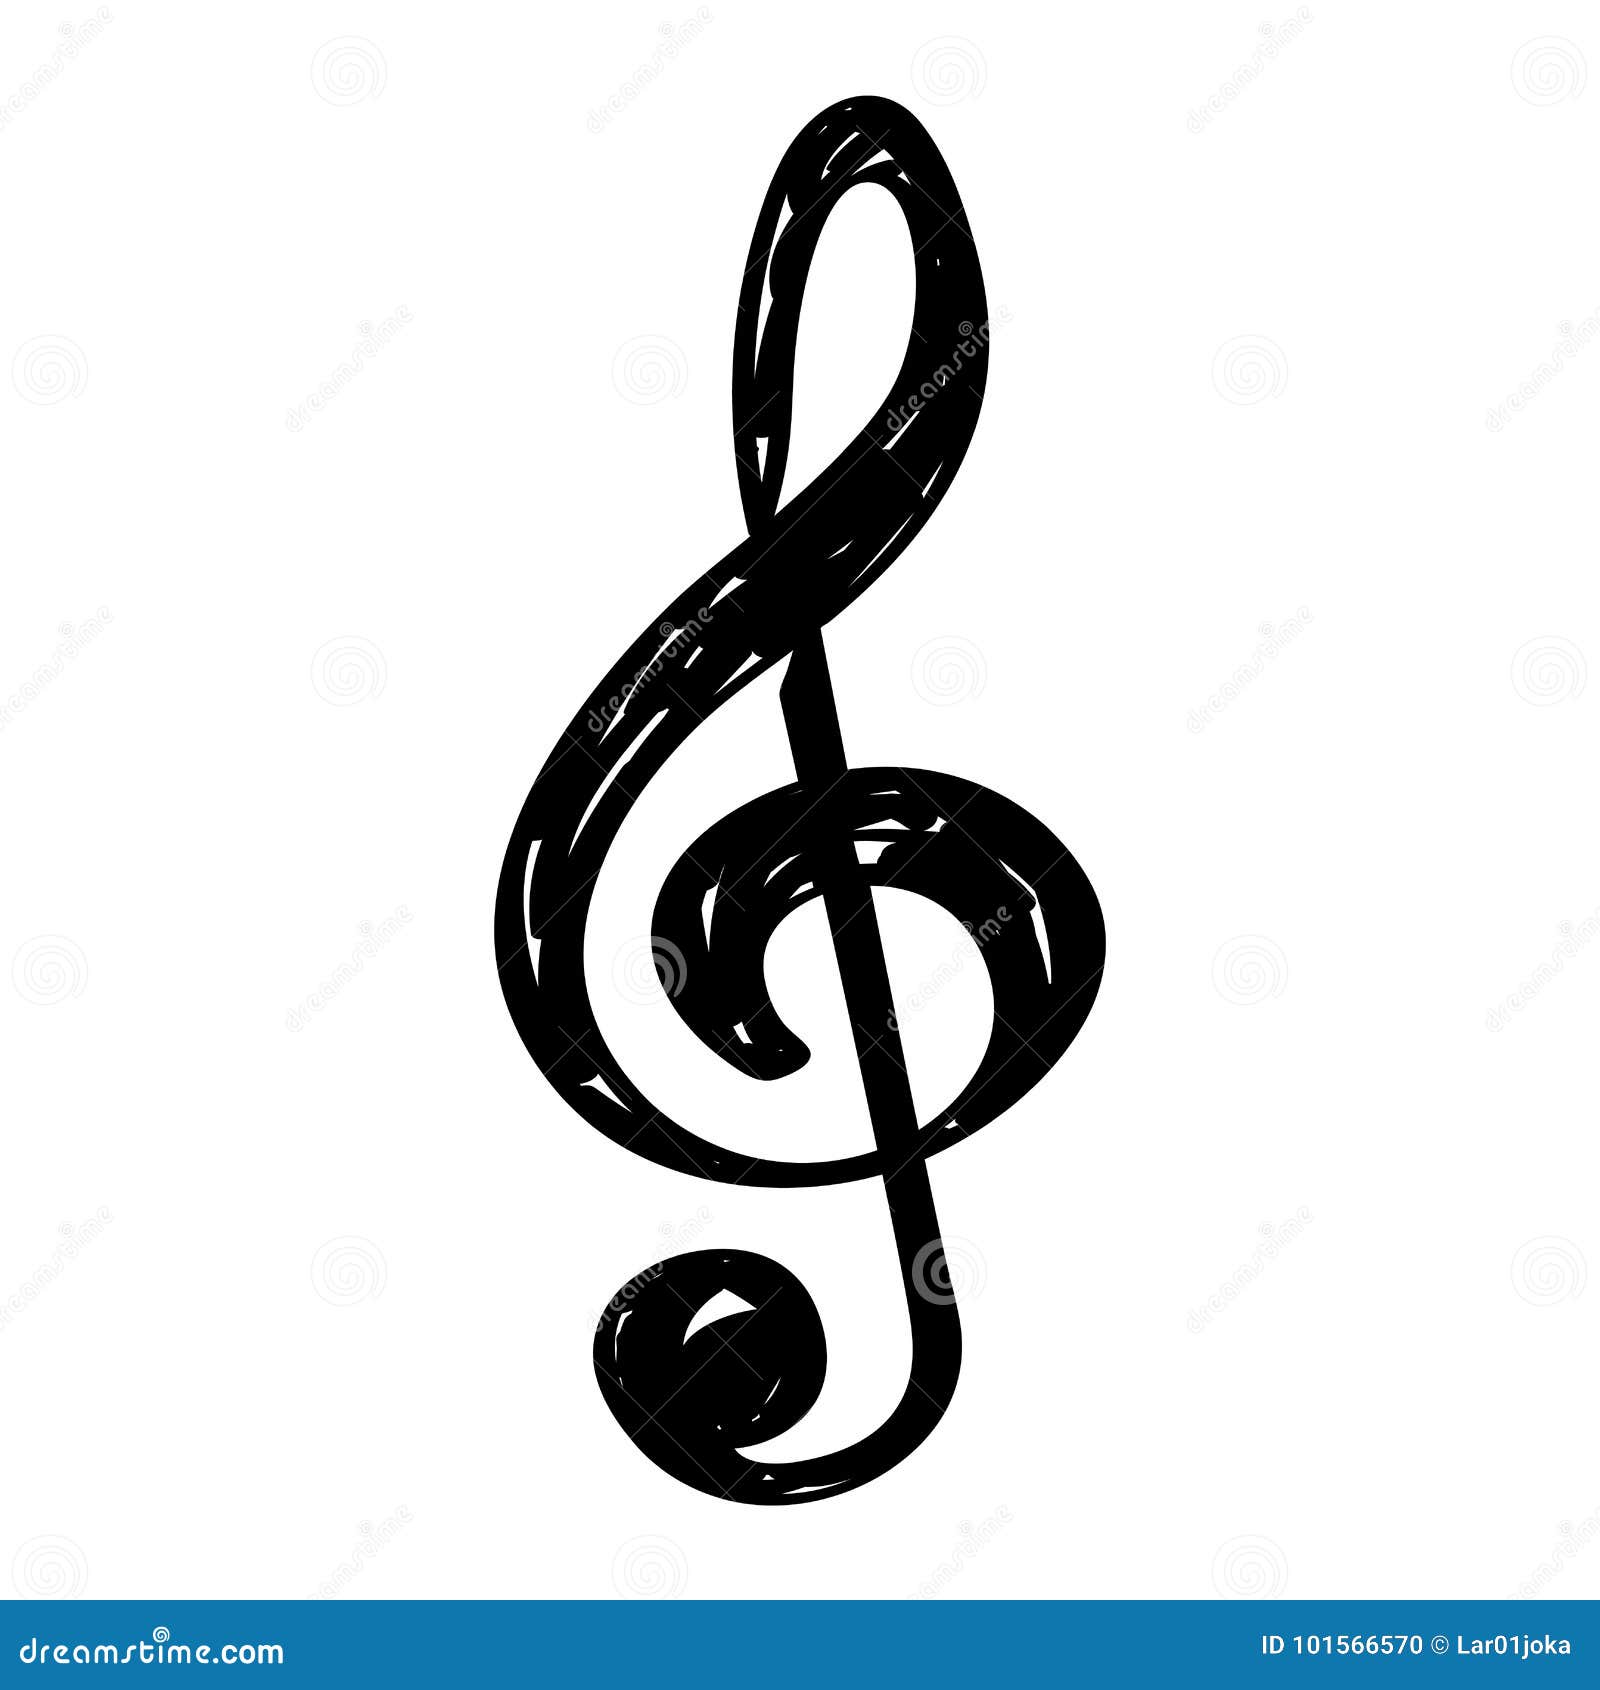 Music notes element for your design in vintage sketch style  wall  stickers wave voice vocal  myloviewcom